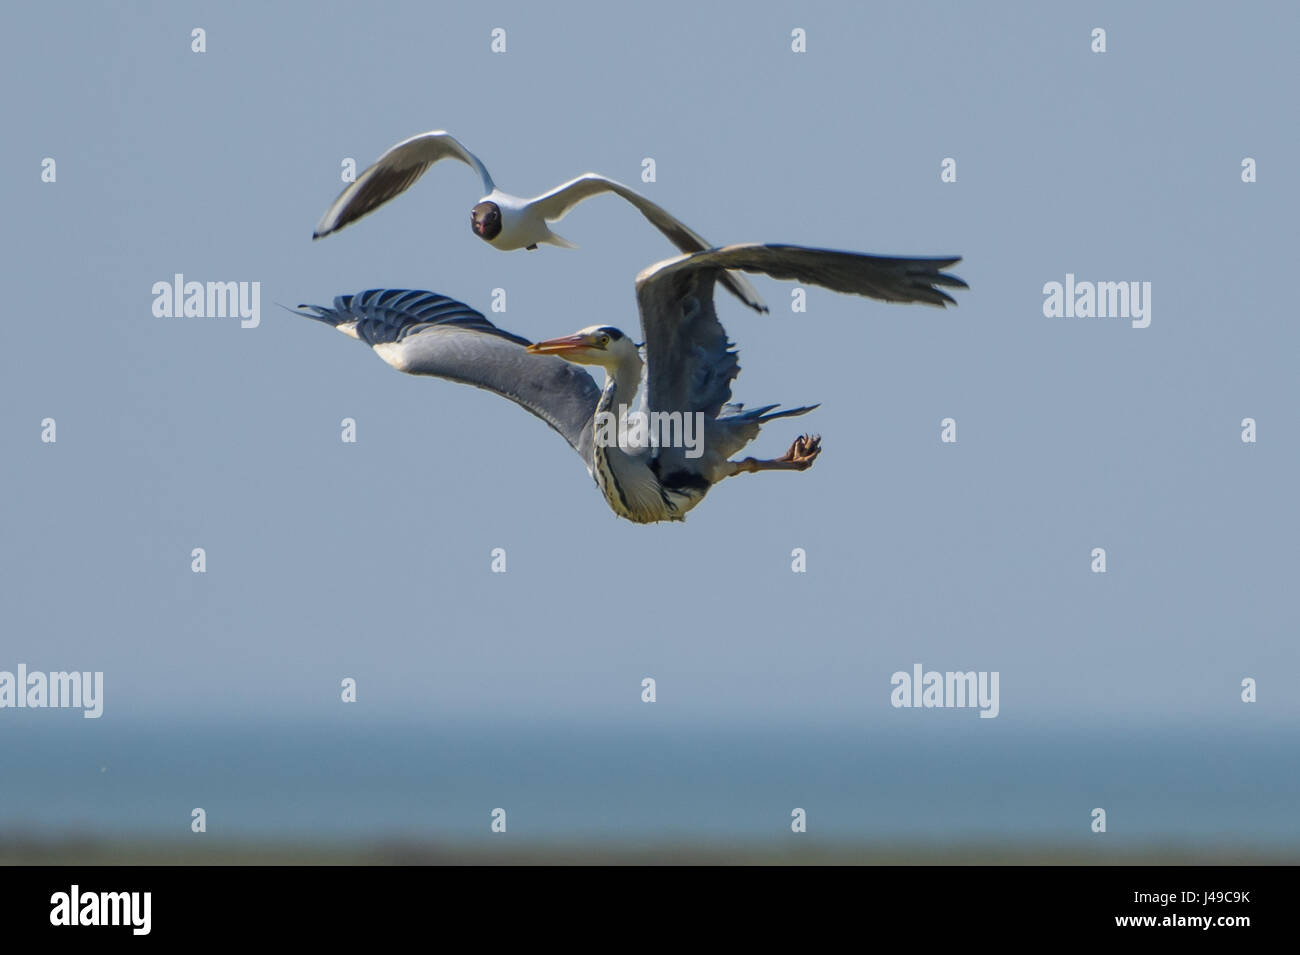 Lancashire, UK. 11th May, 2017. A Black-headed gull sees off a Grey heron at RSPB's Leighton Moss Nature Reserve, Silverdale, Lancashire after a pair of the birds flew over the site occupied by a flock of the gulls. Credit: John Eveson/Alamy Live News Stock Photo